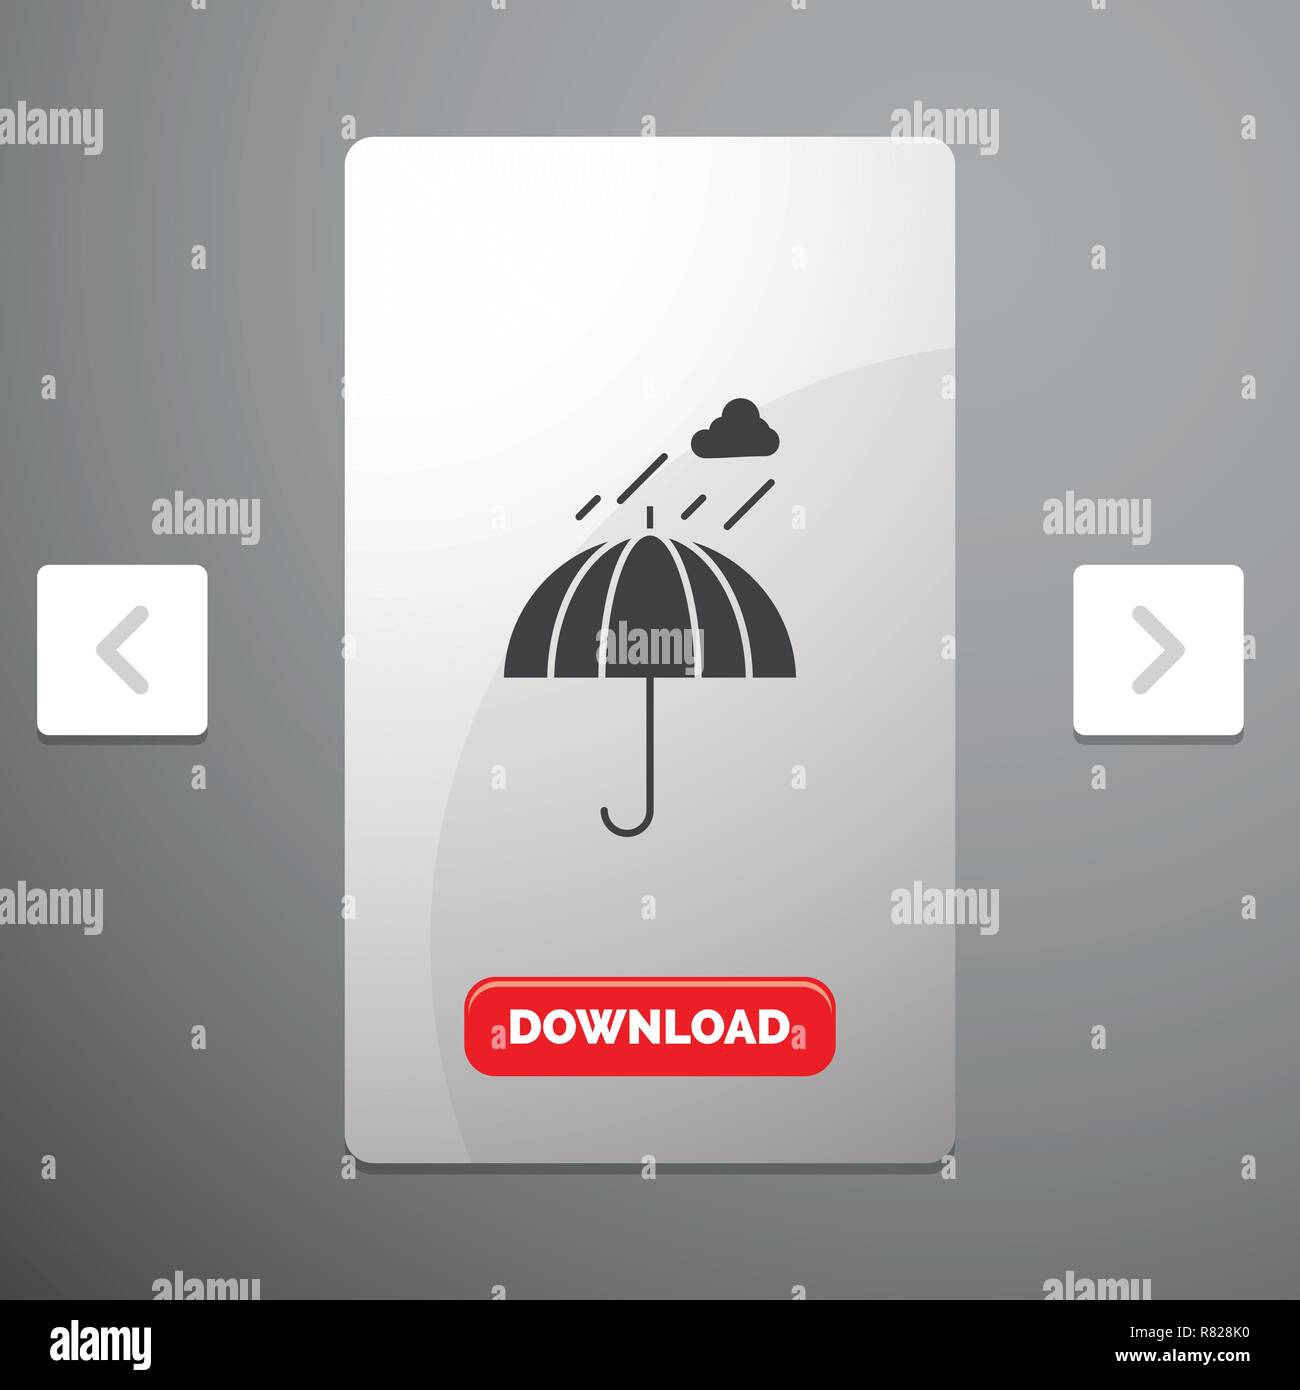 Umbrella, camping, rain, safety, weather Glyph Icon in Carousal Pagination Slider Design & Red Download Button Stock Vector